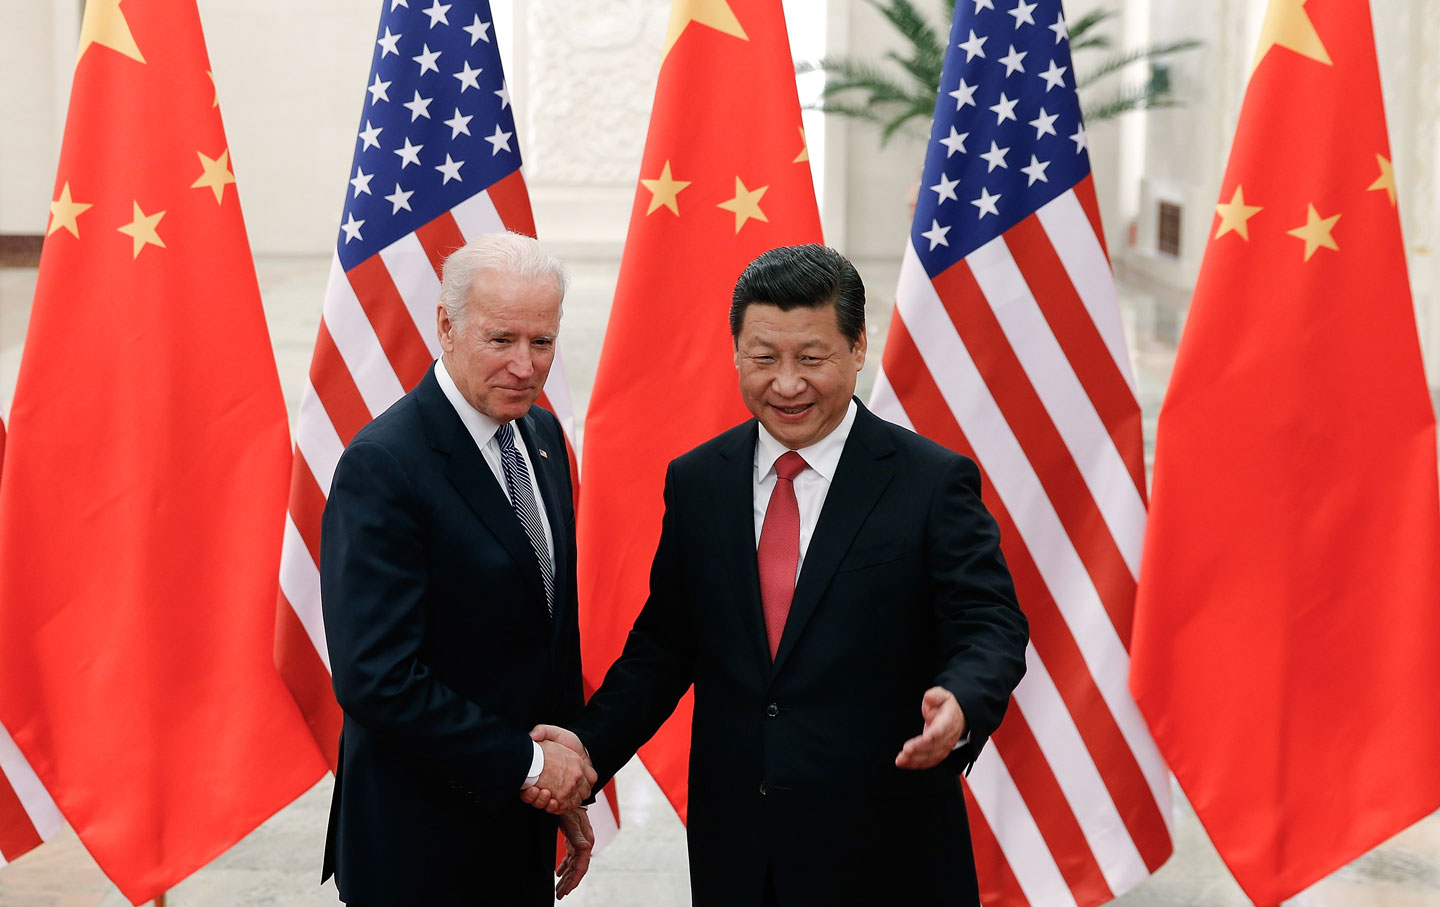 Without the US and China’s Cooperation, Climate Catastrophe Is Inevitable